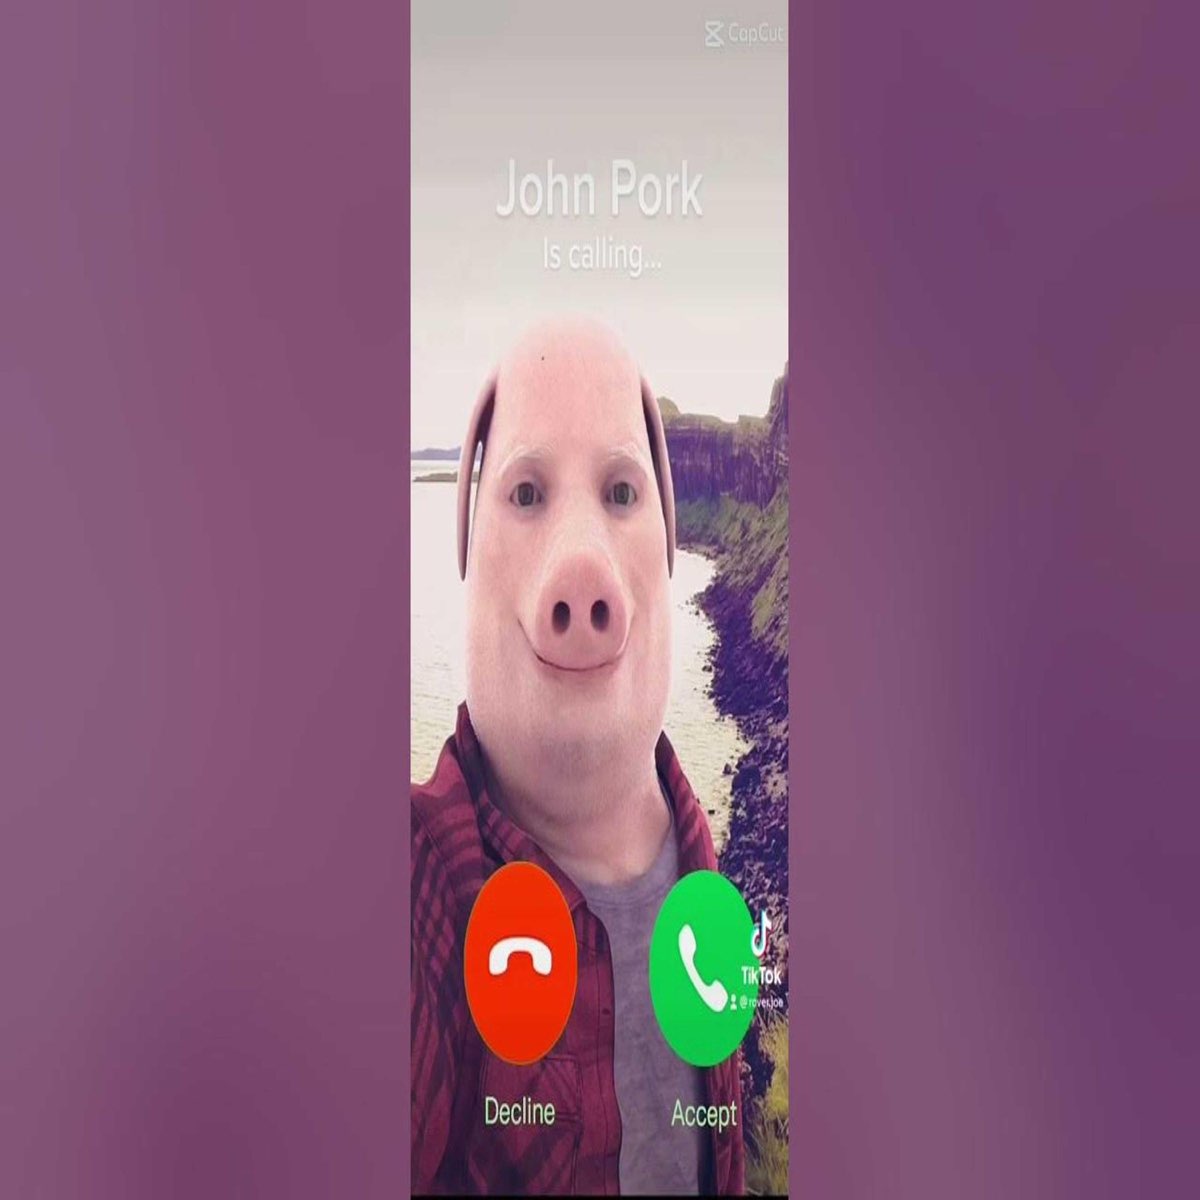 Who is John Pork and Why Is He Calling on TikTok?